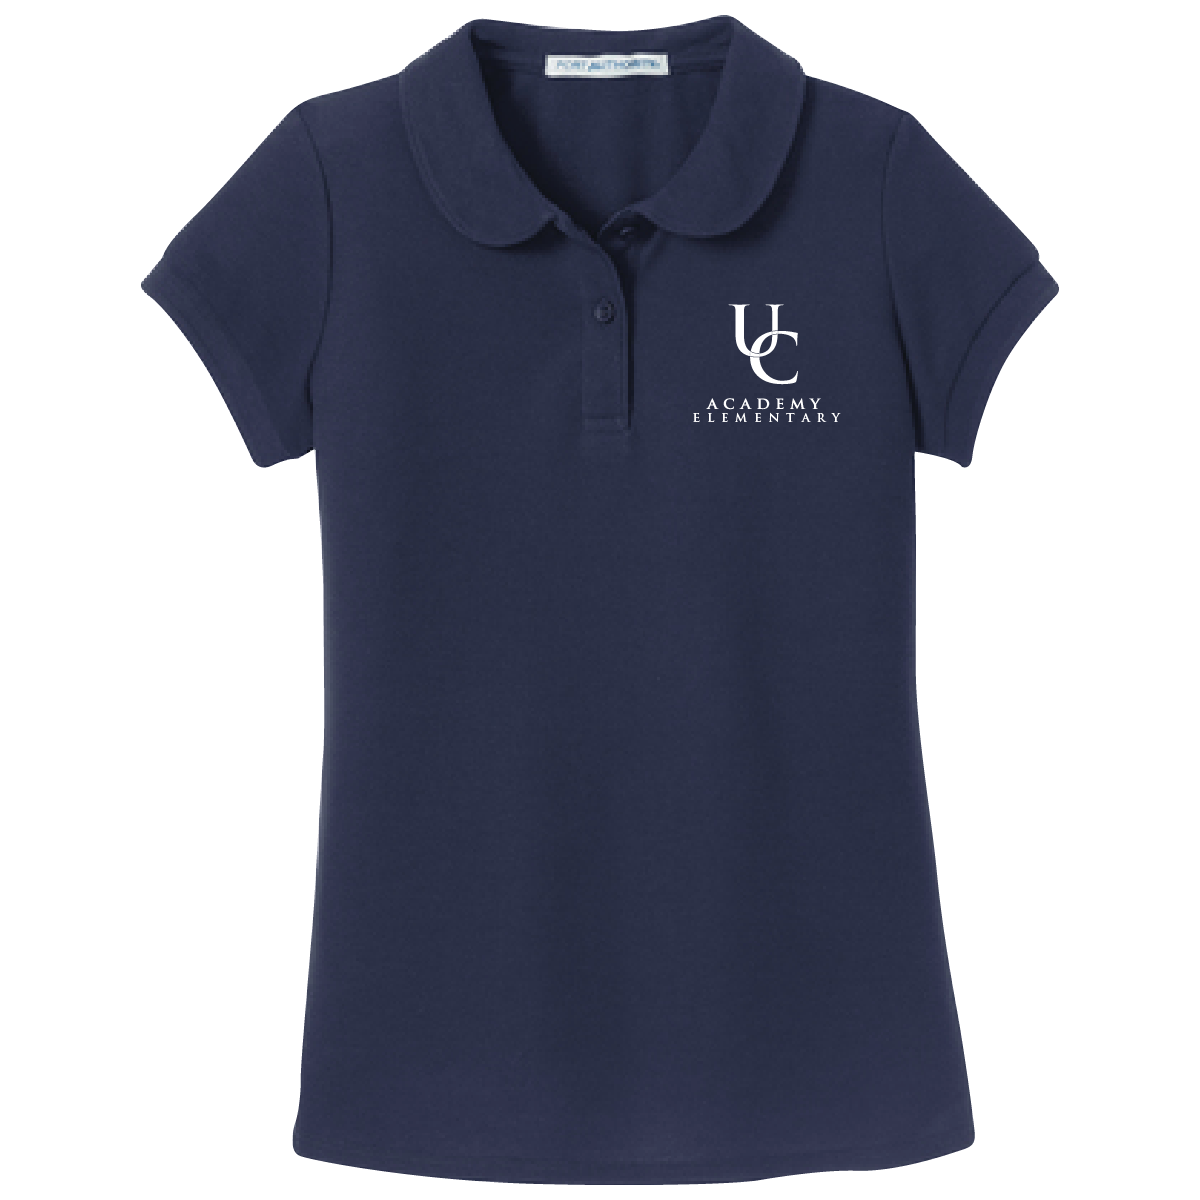 Elementary Peter Pan Polo